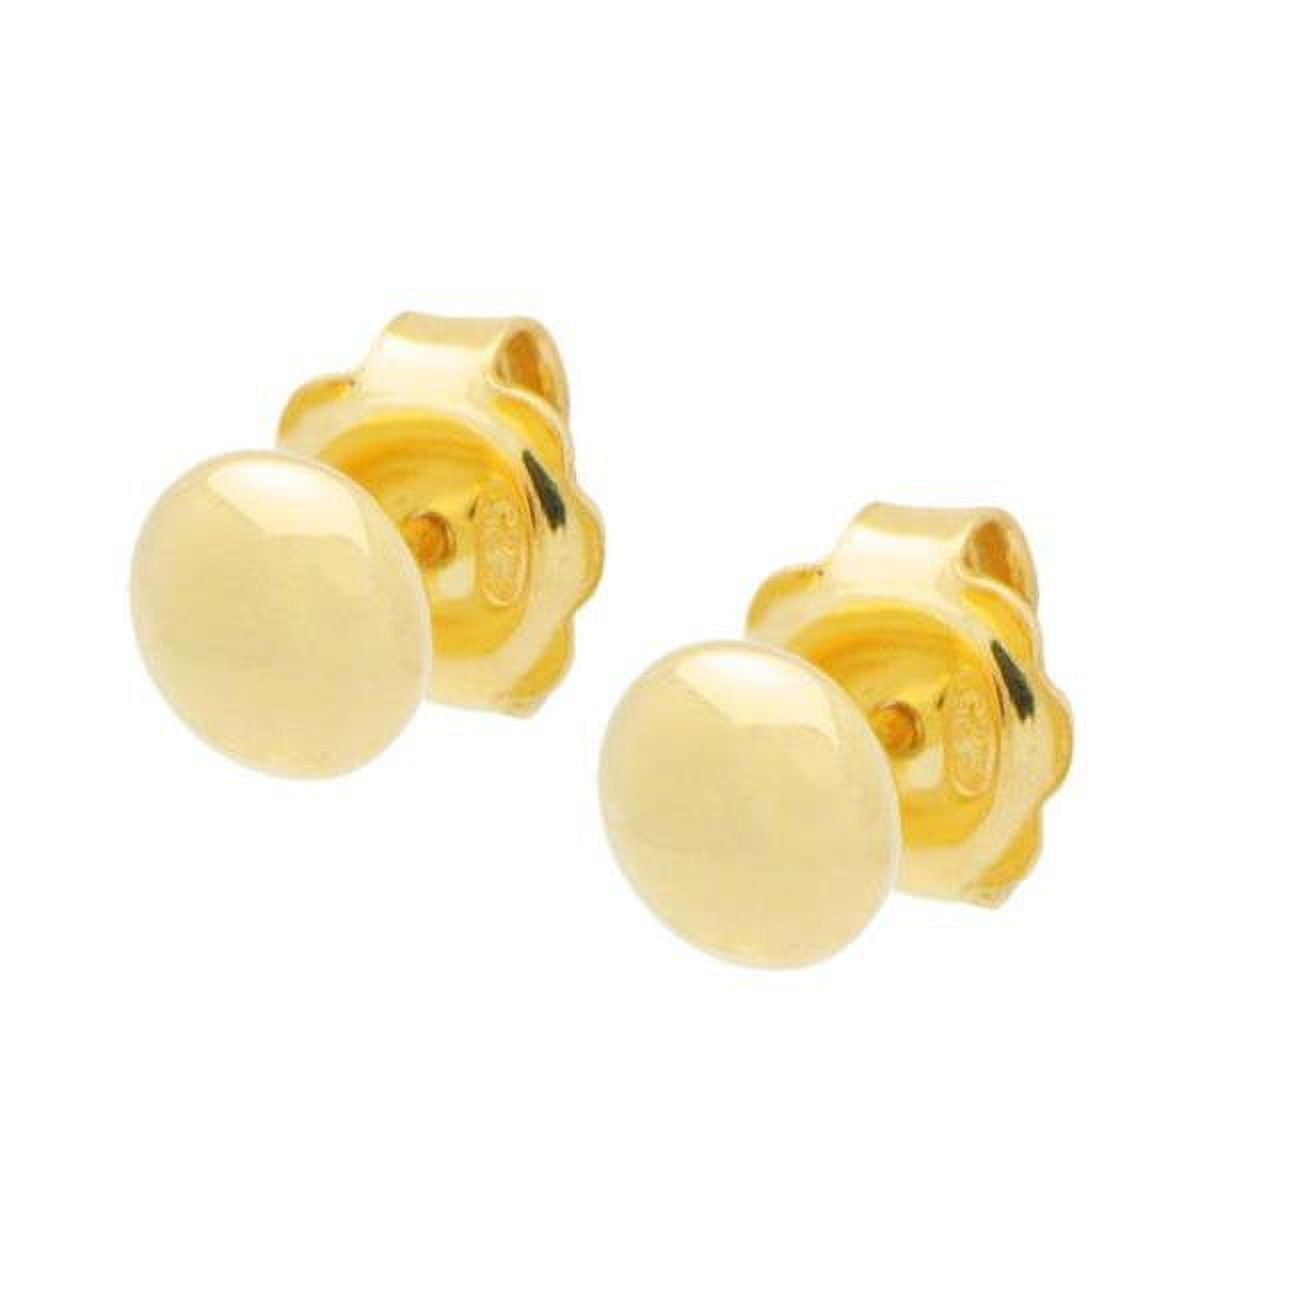 Picture of Fronay 415118G 6 mm Mirror Gold Button Stud Earrings in Sterling Silver